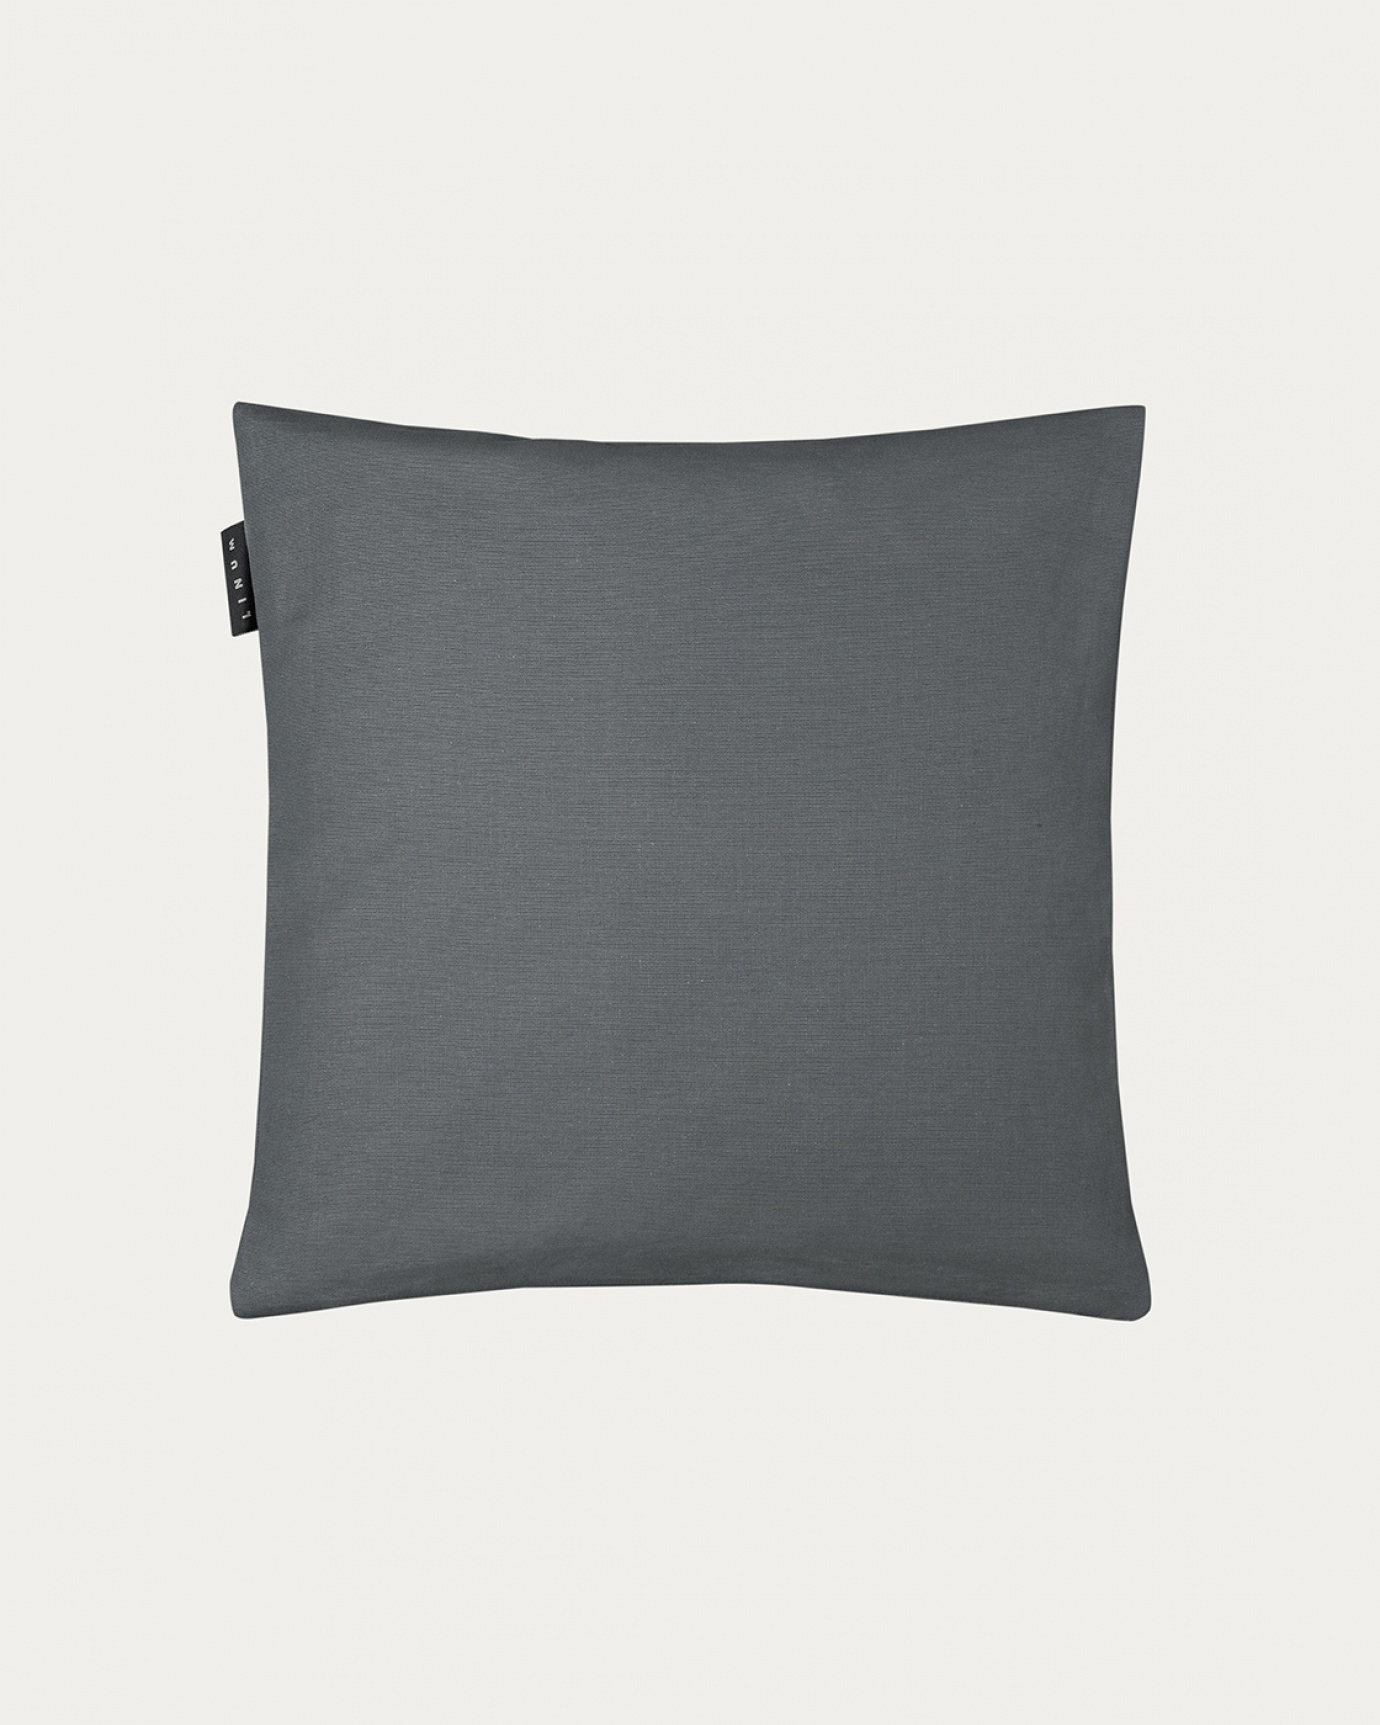 Product image granite grey ANNABELL cushion cover made of soft cotton from LINUM DESIGN. Size 40x40 cm.